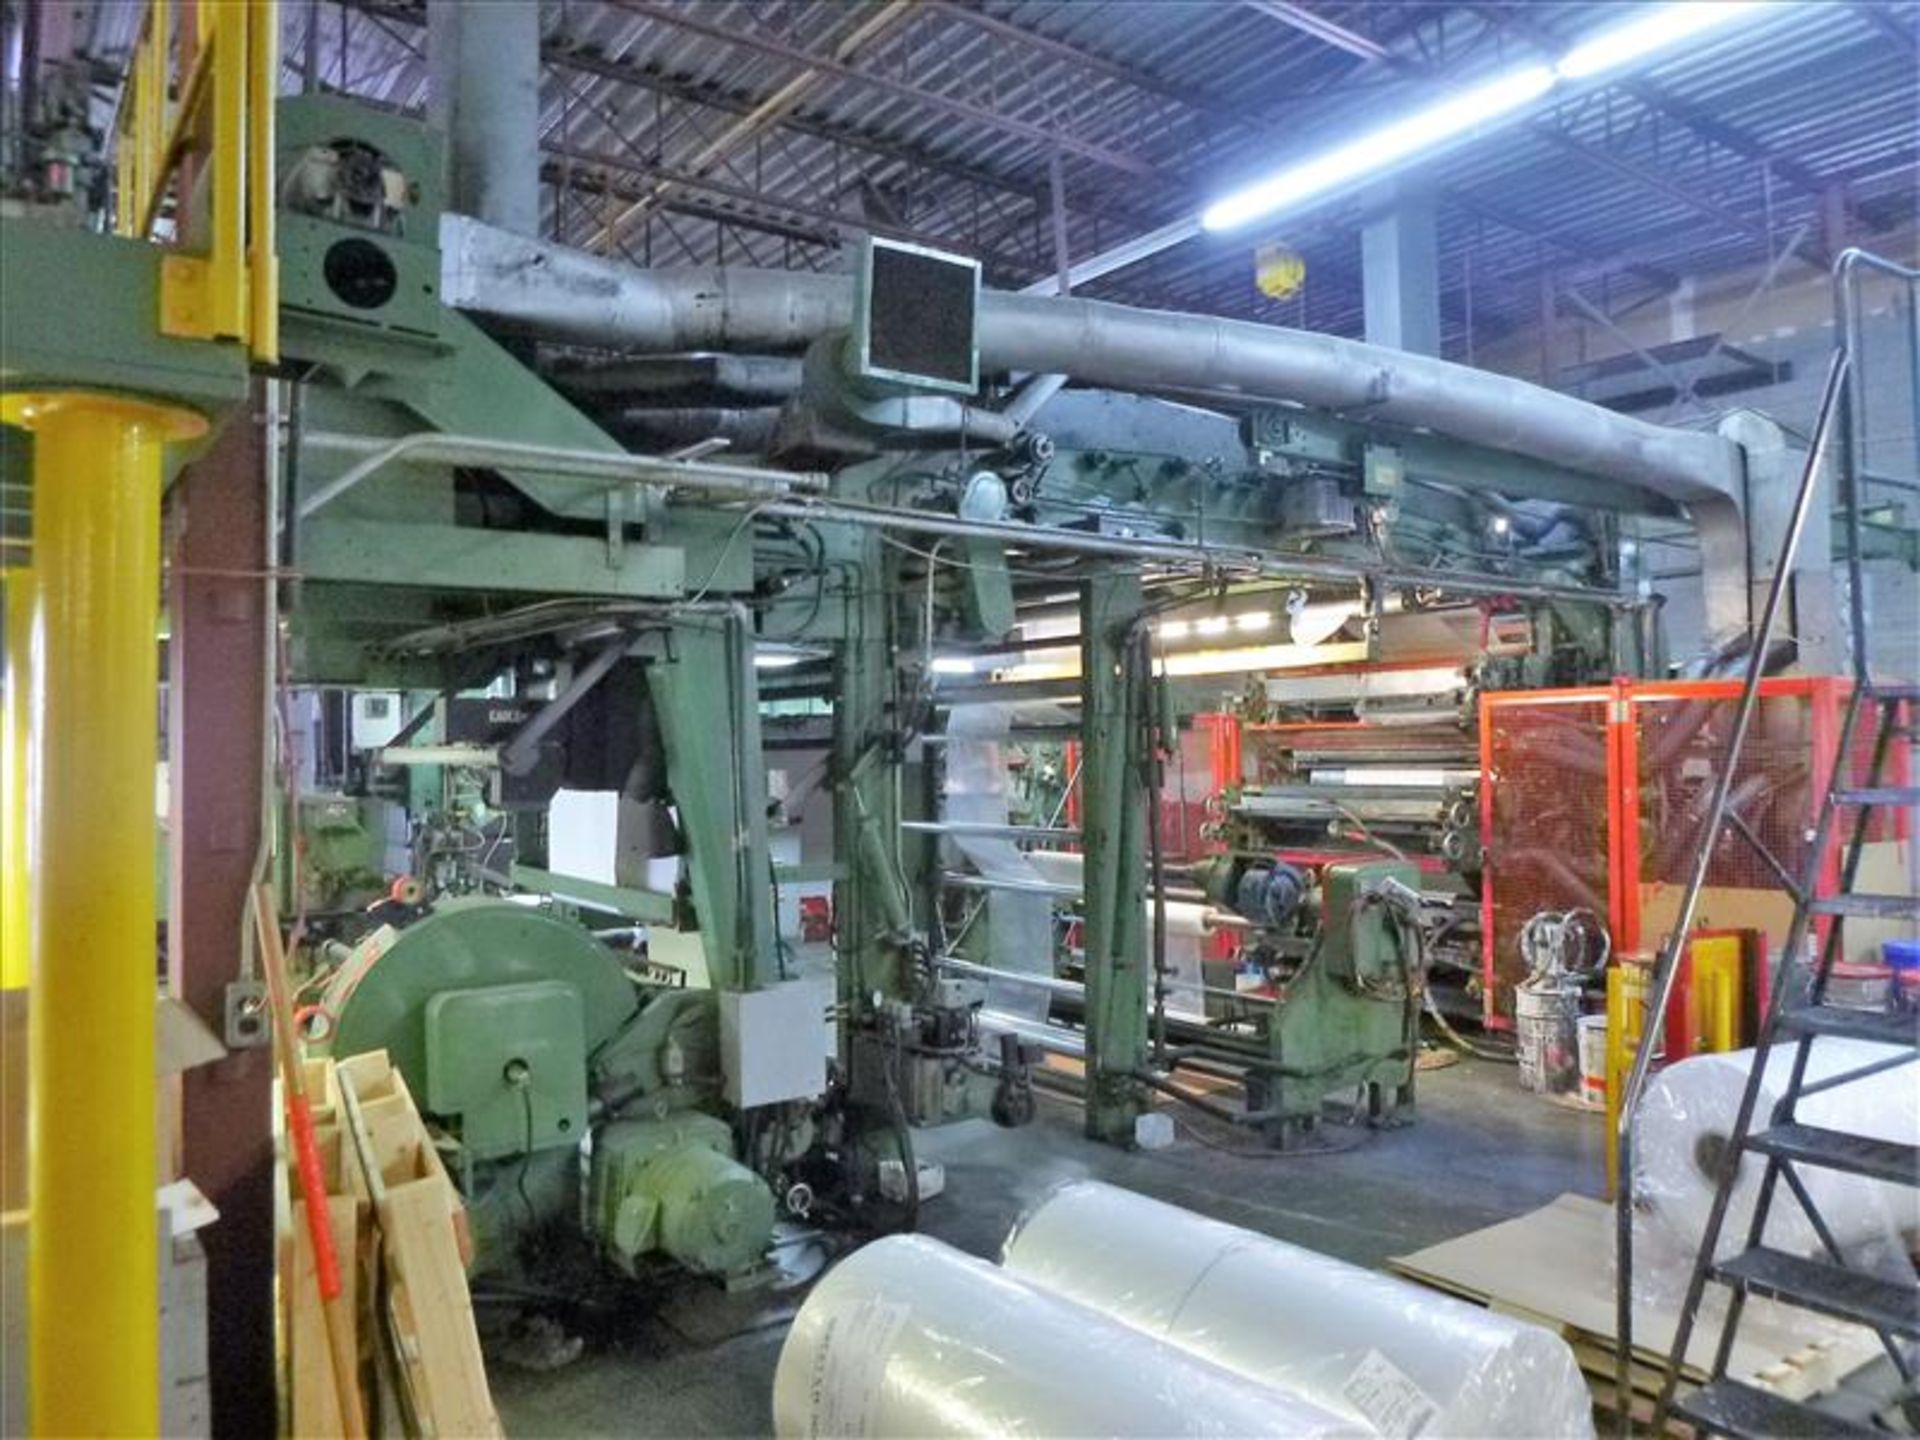 PCMC (Paper Converting Machine Co.) 6-colour central impression flexographic printing press, 56" - Image 17 of 30